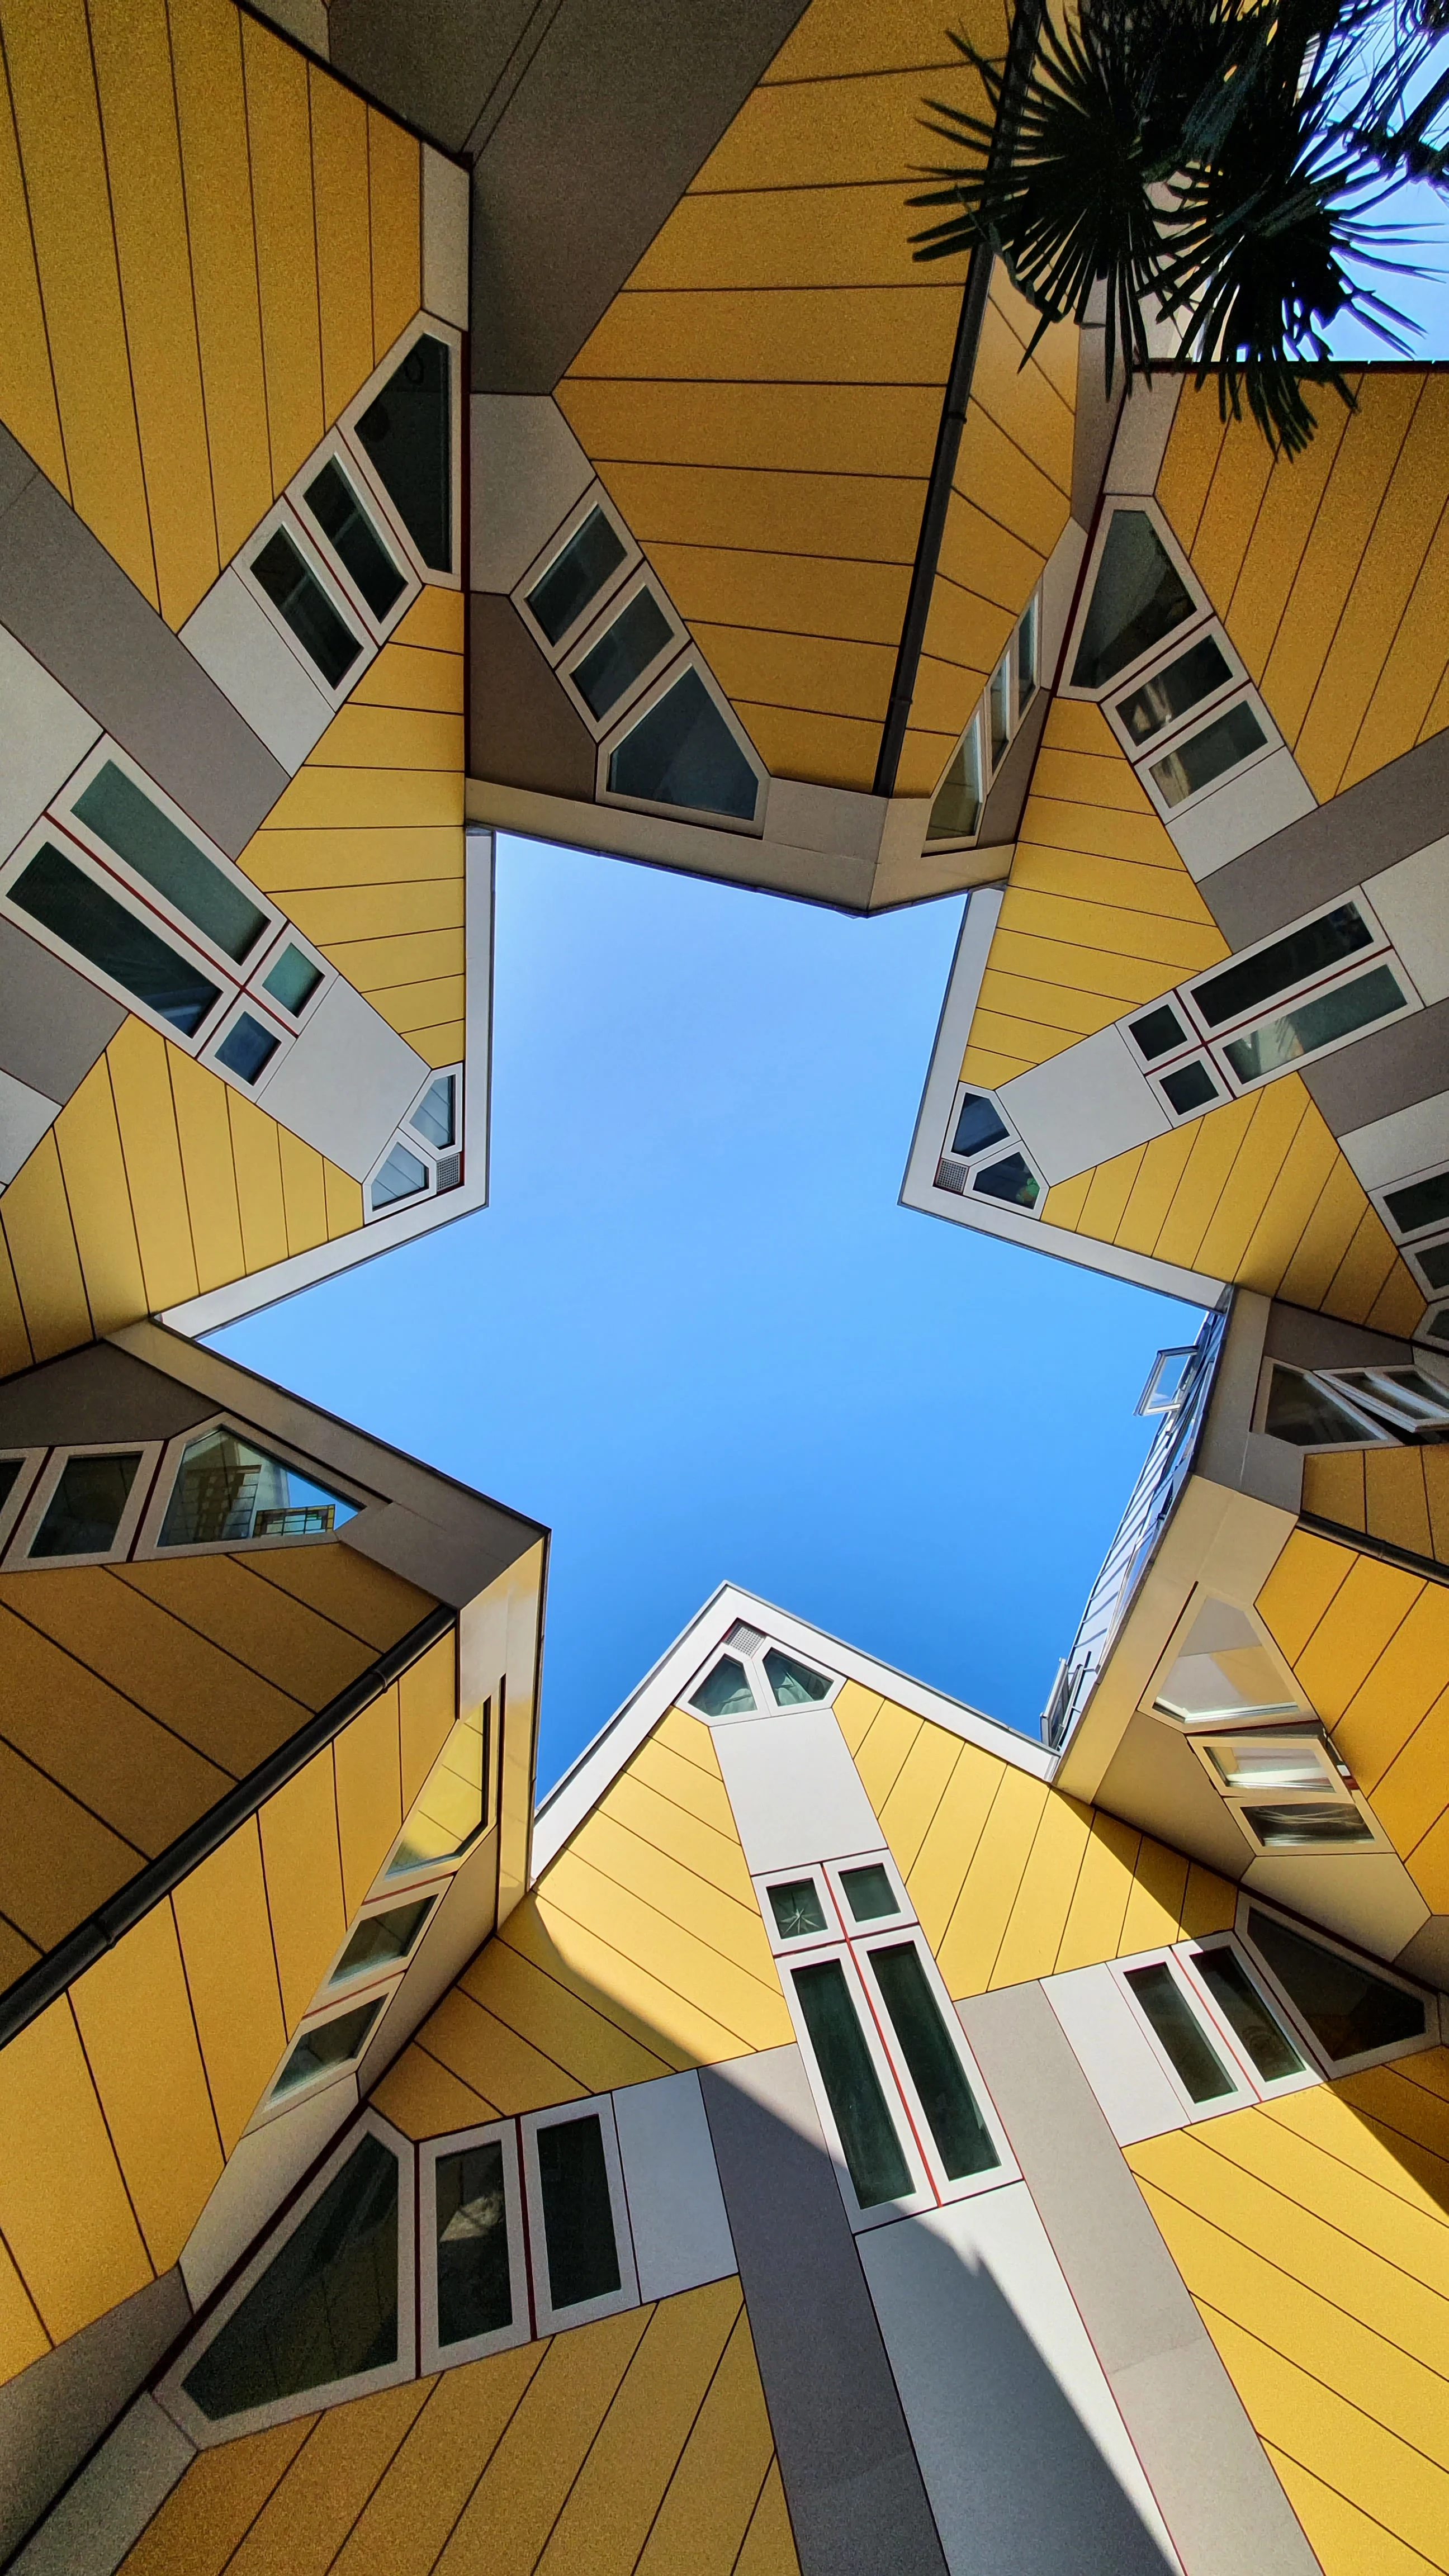 The Cube Houses in Rotterdam, the Netherlands. Taken by Marcus Bailey